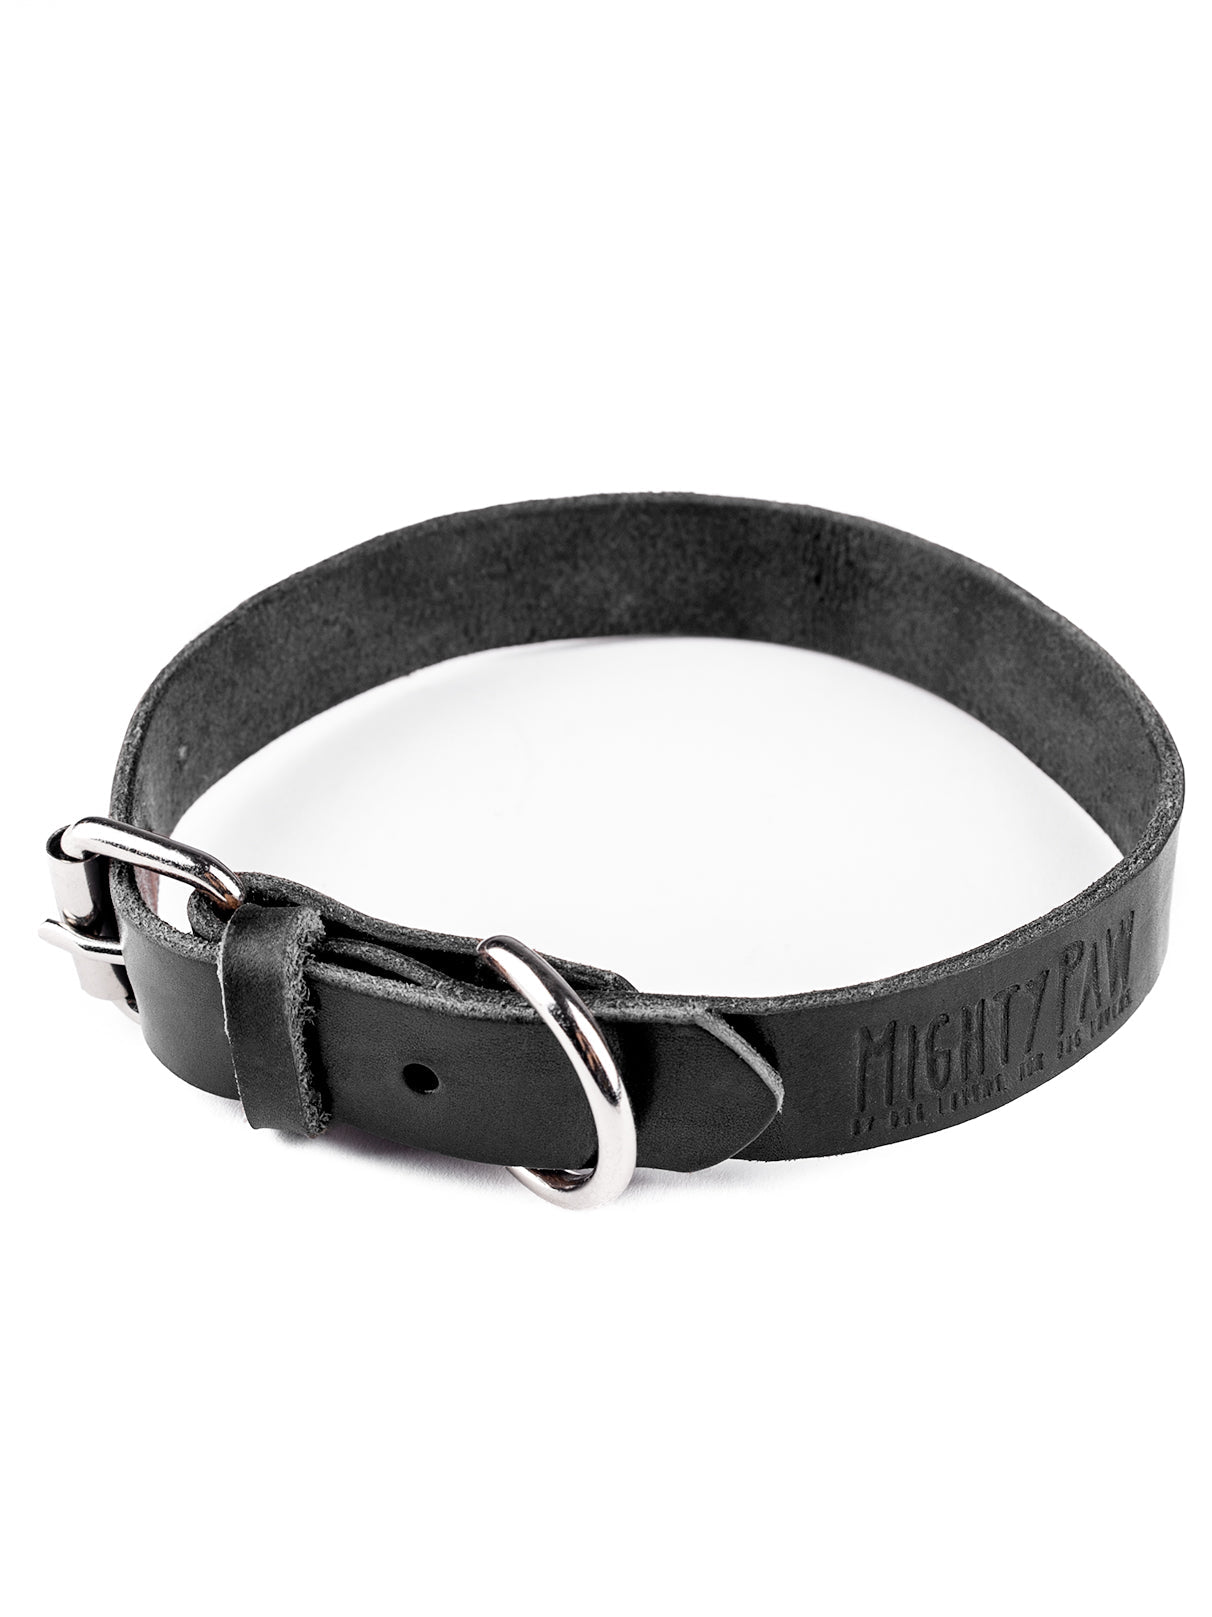 Mighty Paw Distressed Leather Dog Collar & Leash Small / Black - Paw Naturals